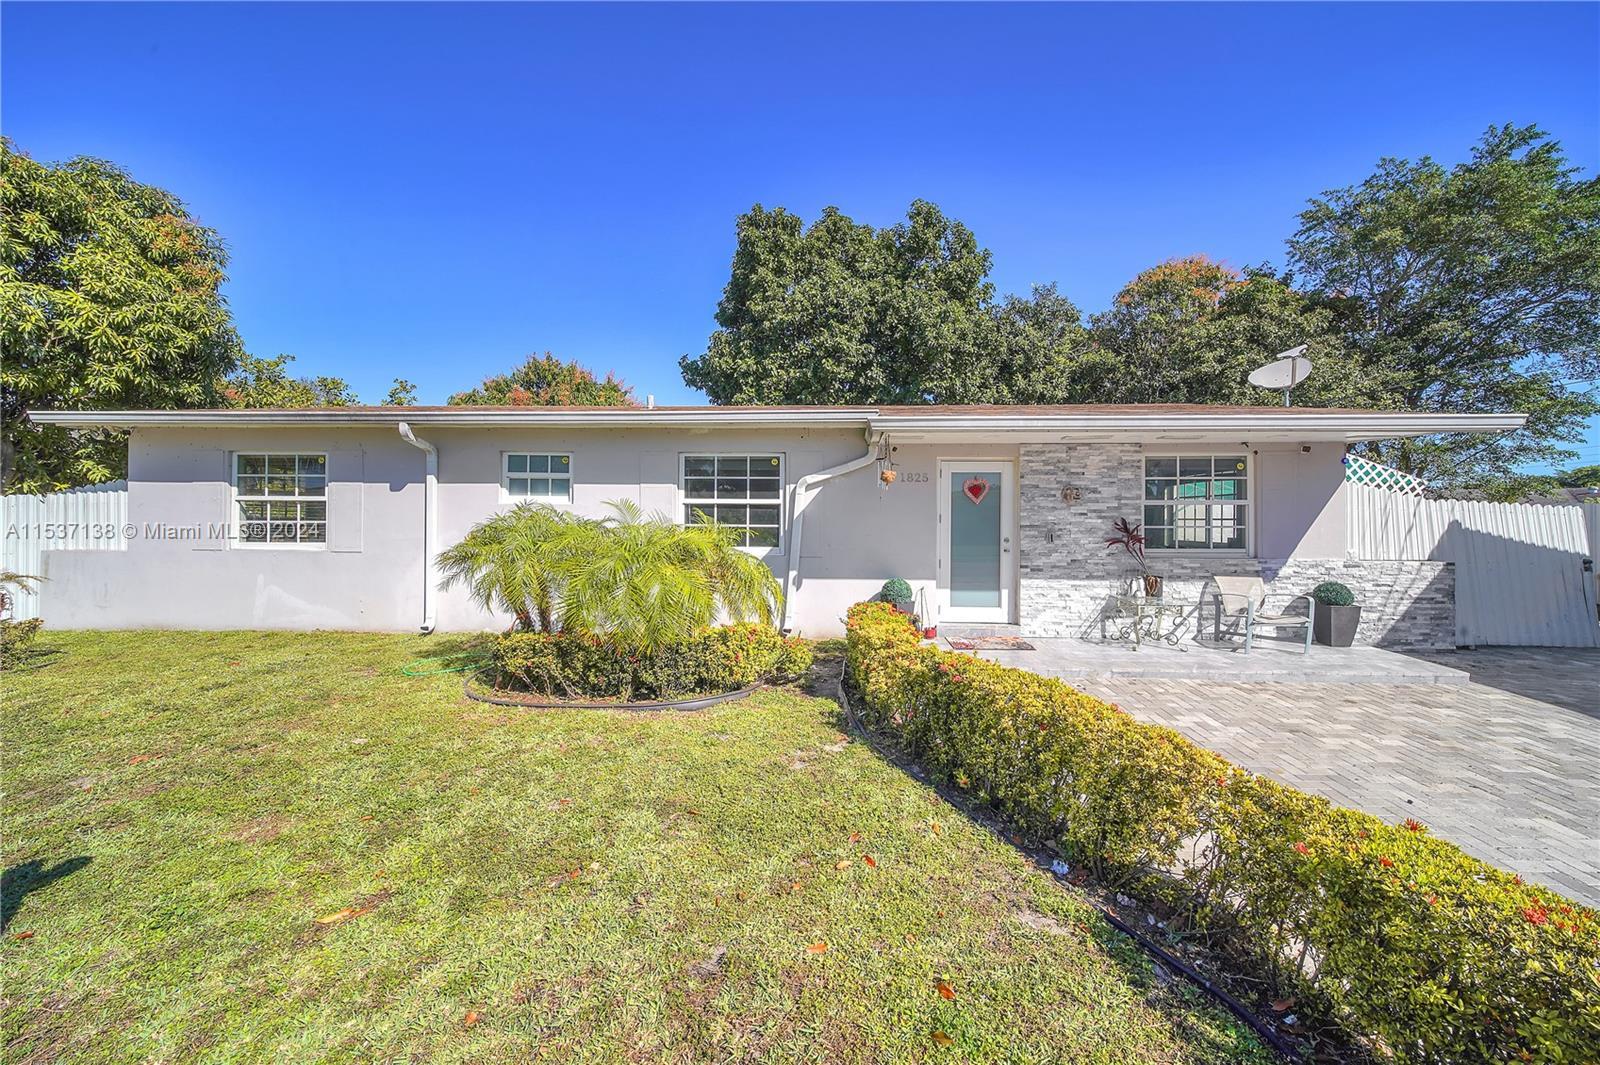 Photo of 1825 NW 172nd Ter in Miami Gardens, FL